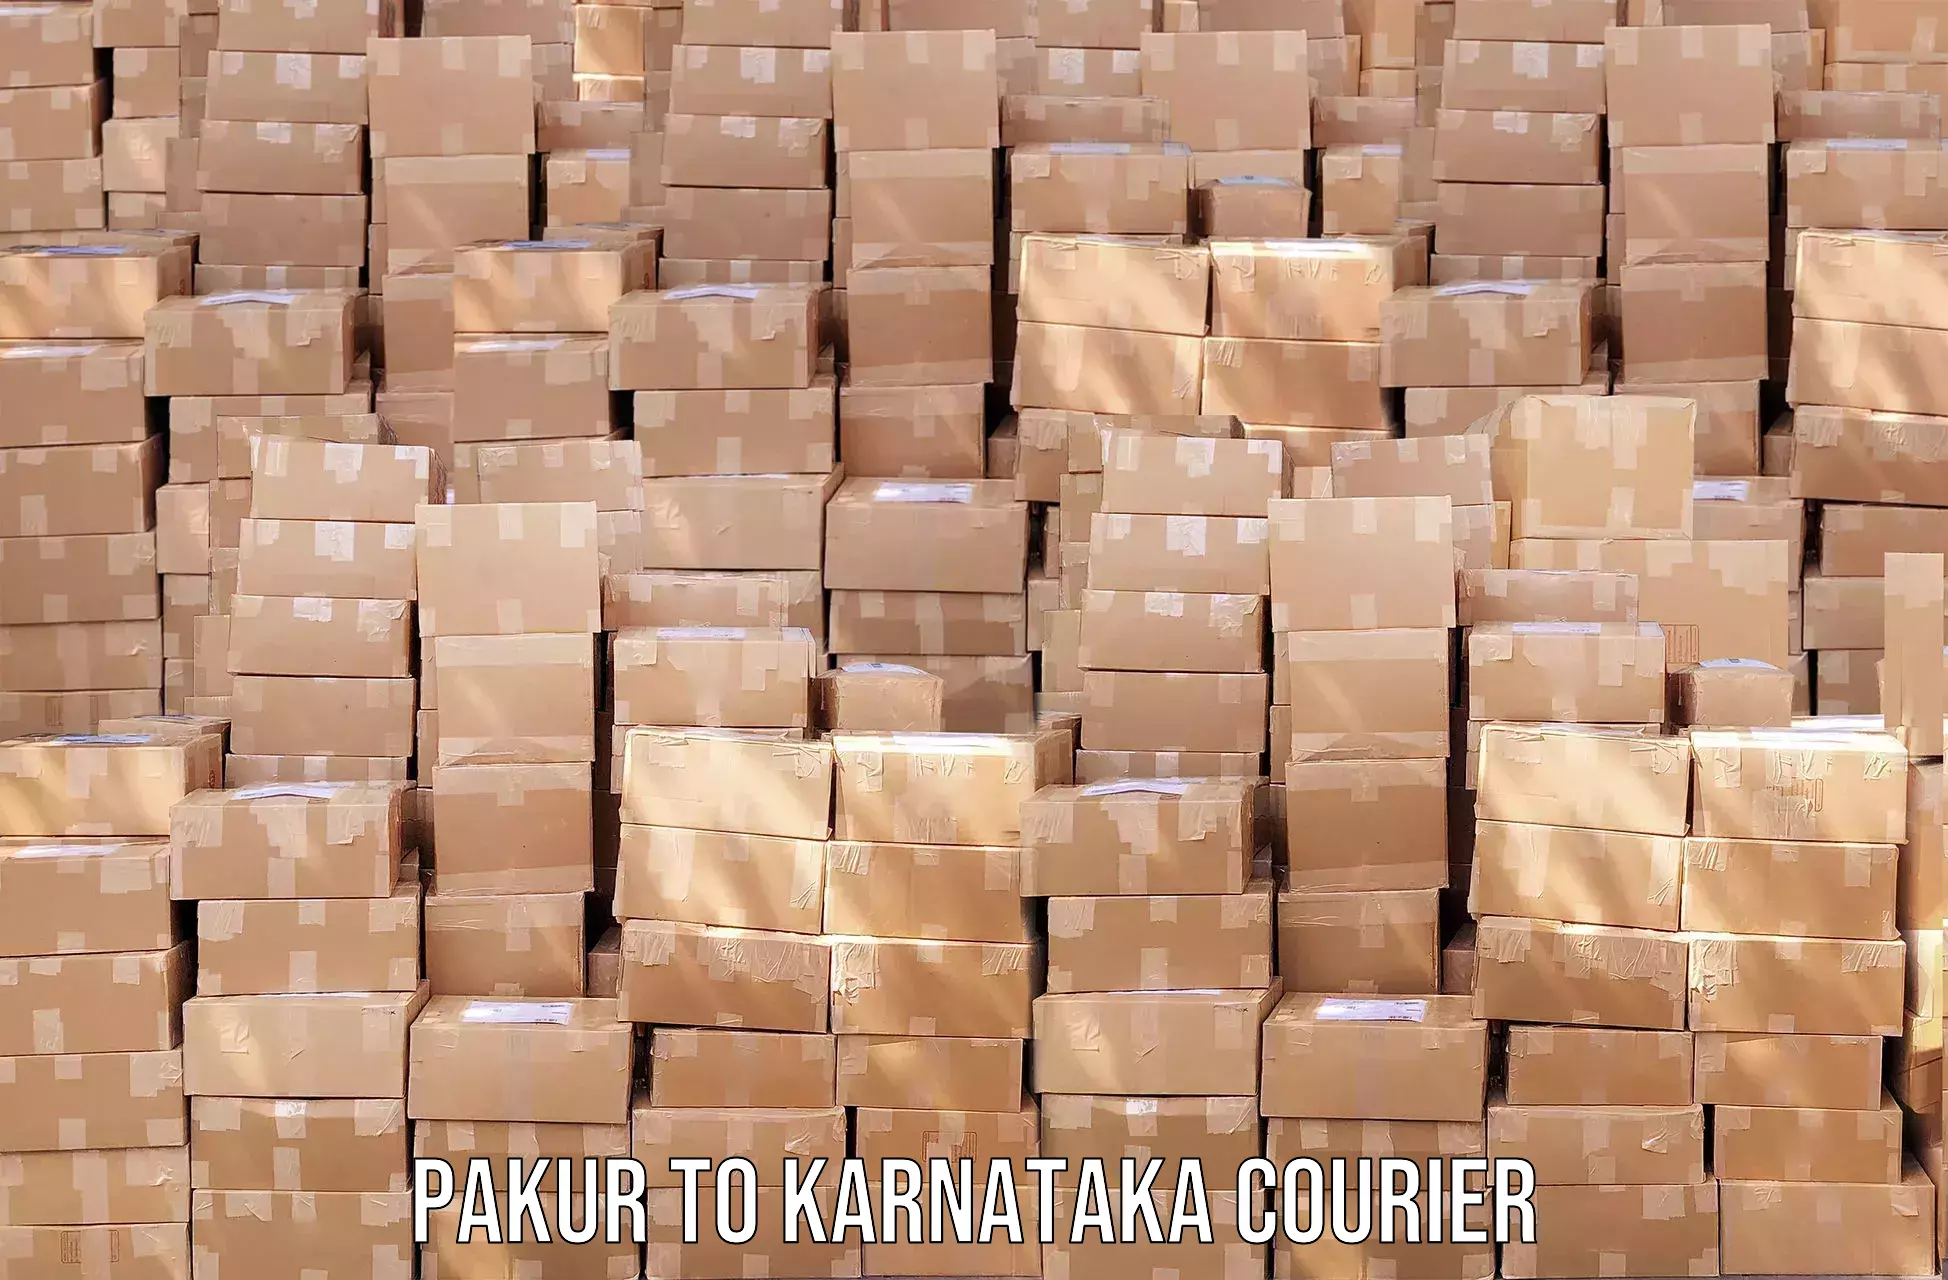 Easy access courier services in Pakur to Bangarapet